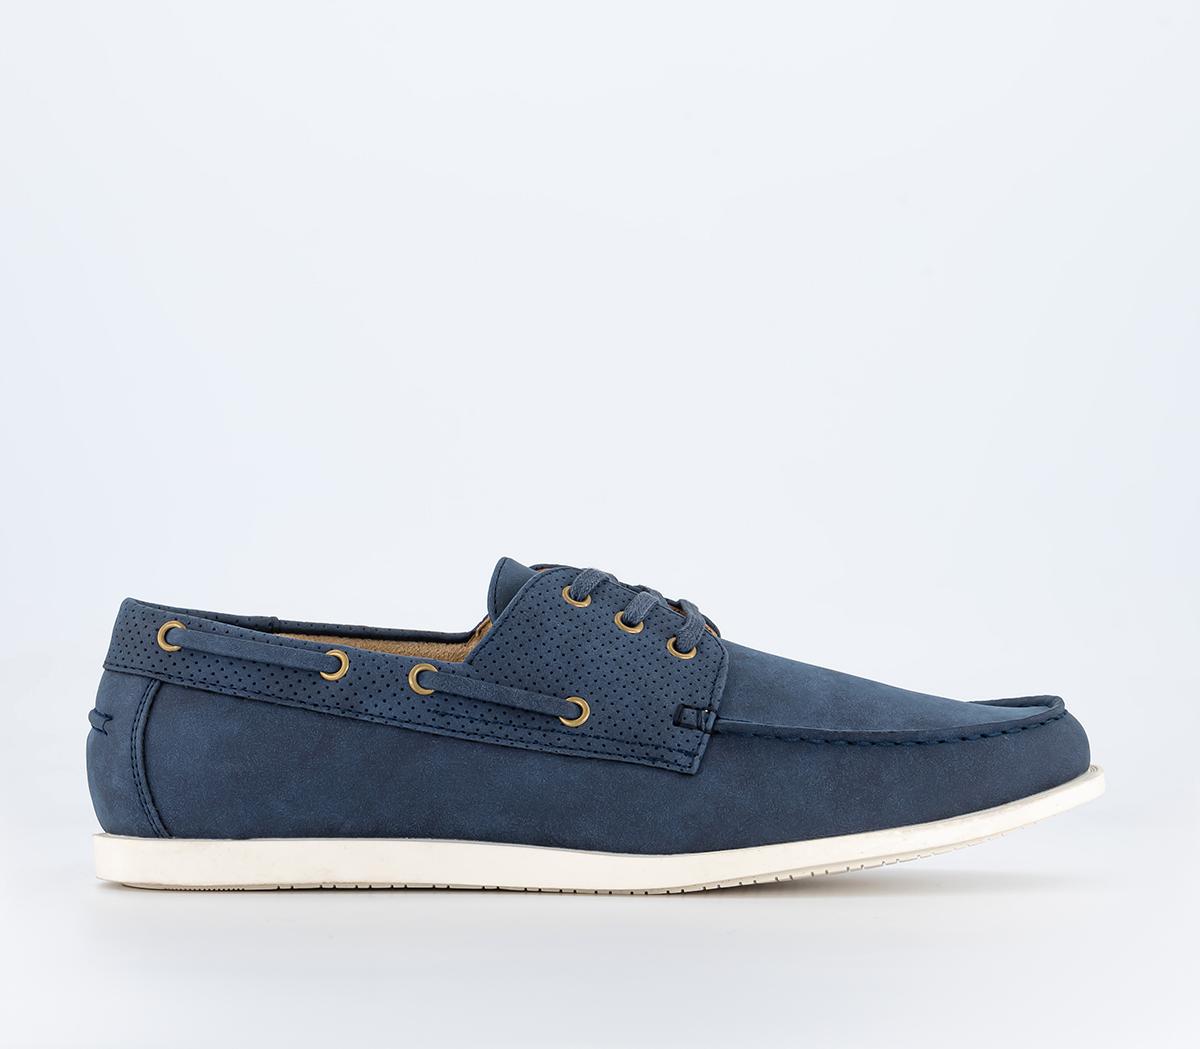 OFFICE Creed Boat Shoes Navy - Men's Casual Shoes